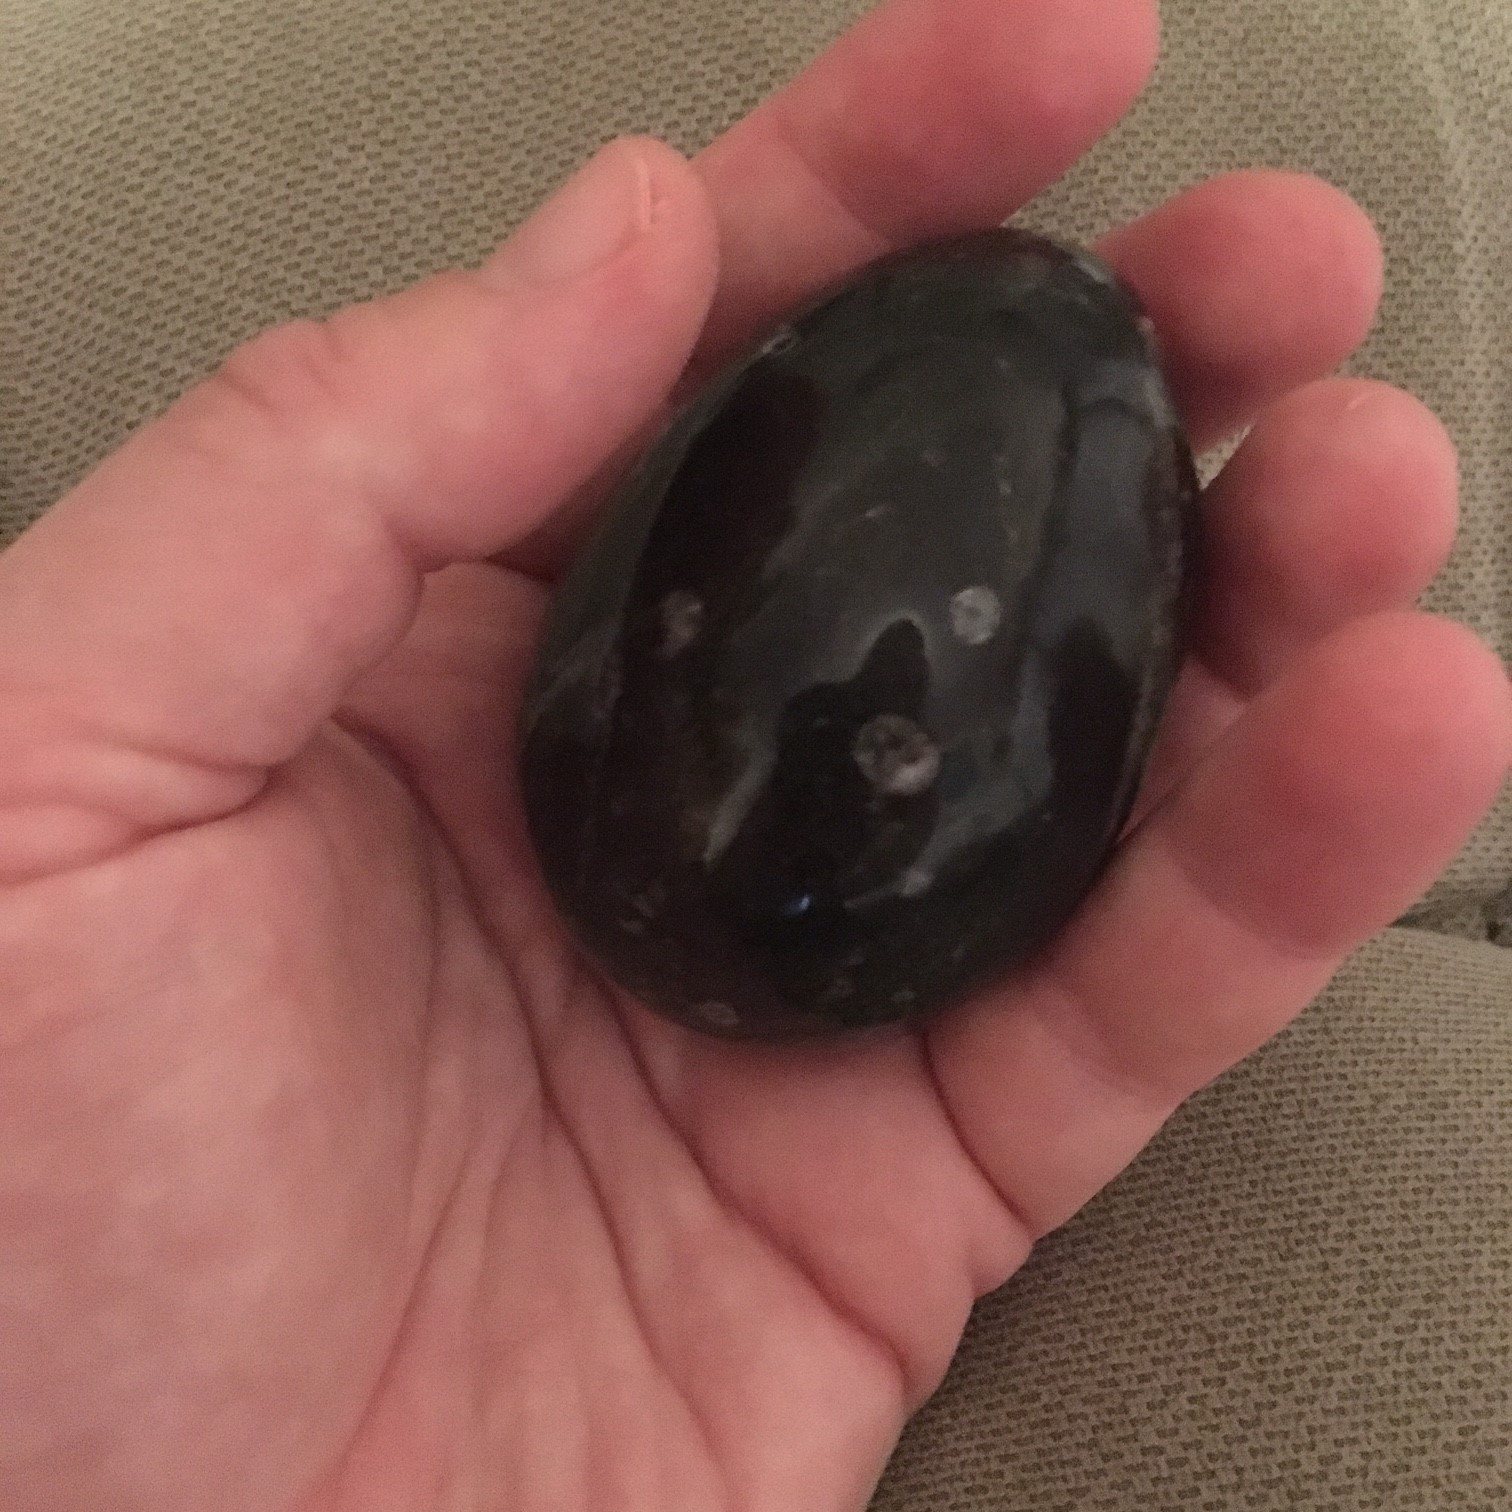 This snowflake obsidian rock fits well in my hand and offers enough weight and size to register strongly with my brain as I pass it back and forth between my hands.